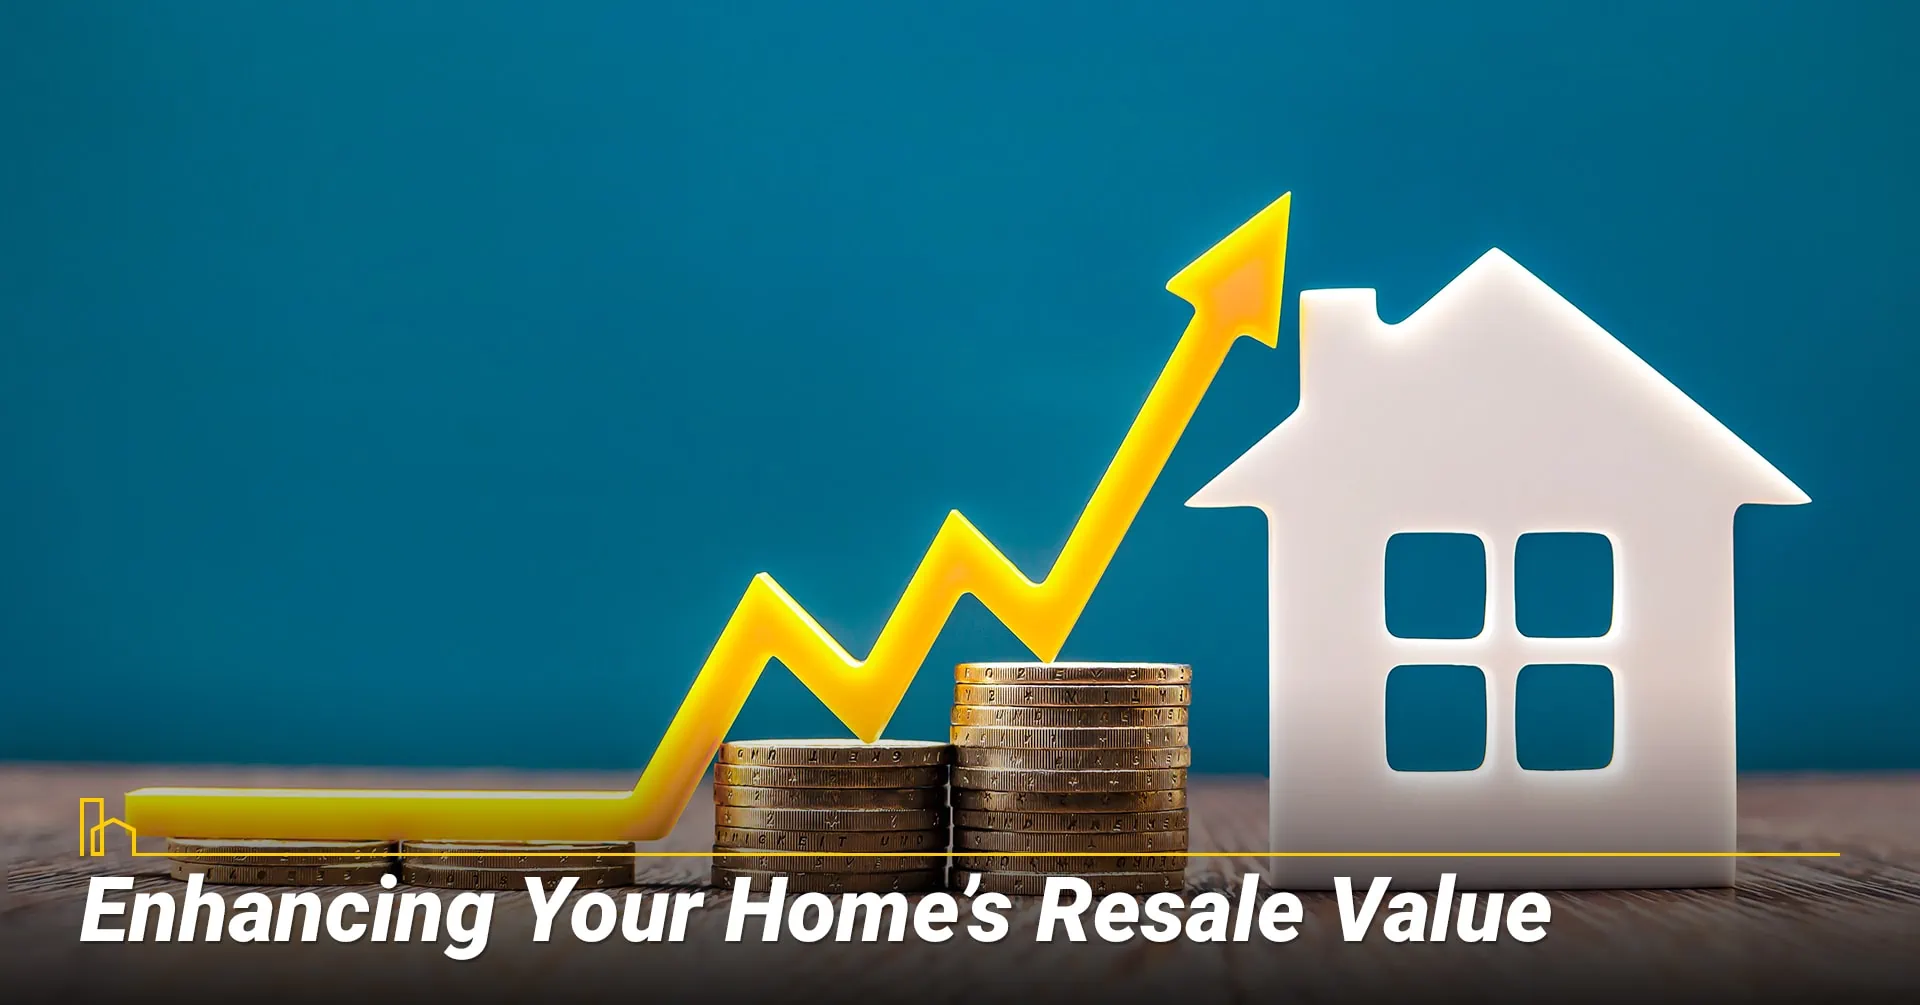 Enhancing Your Home’s Resale Value